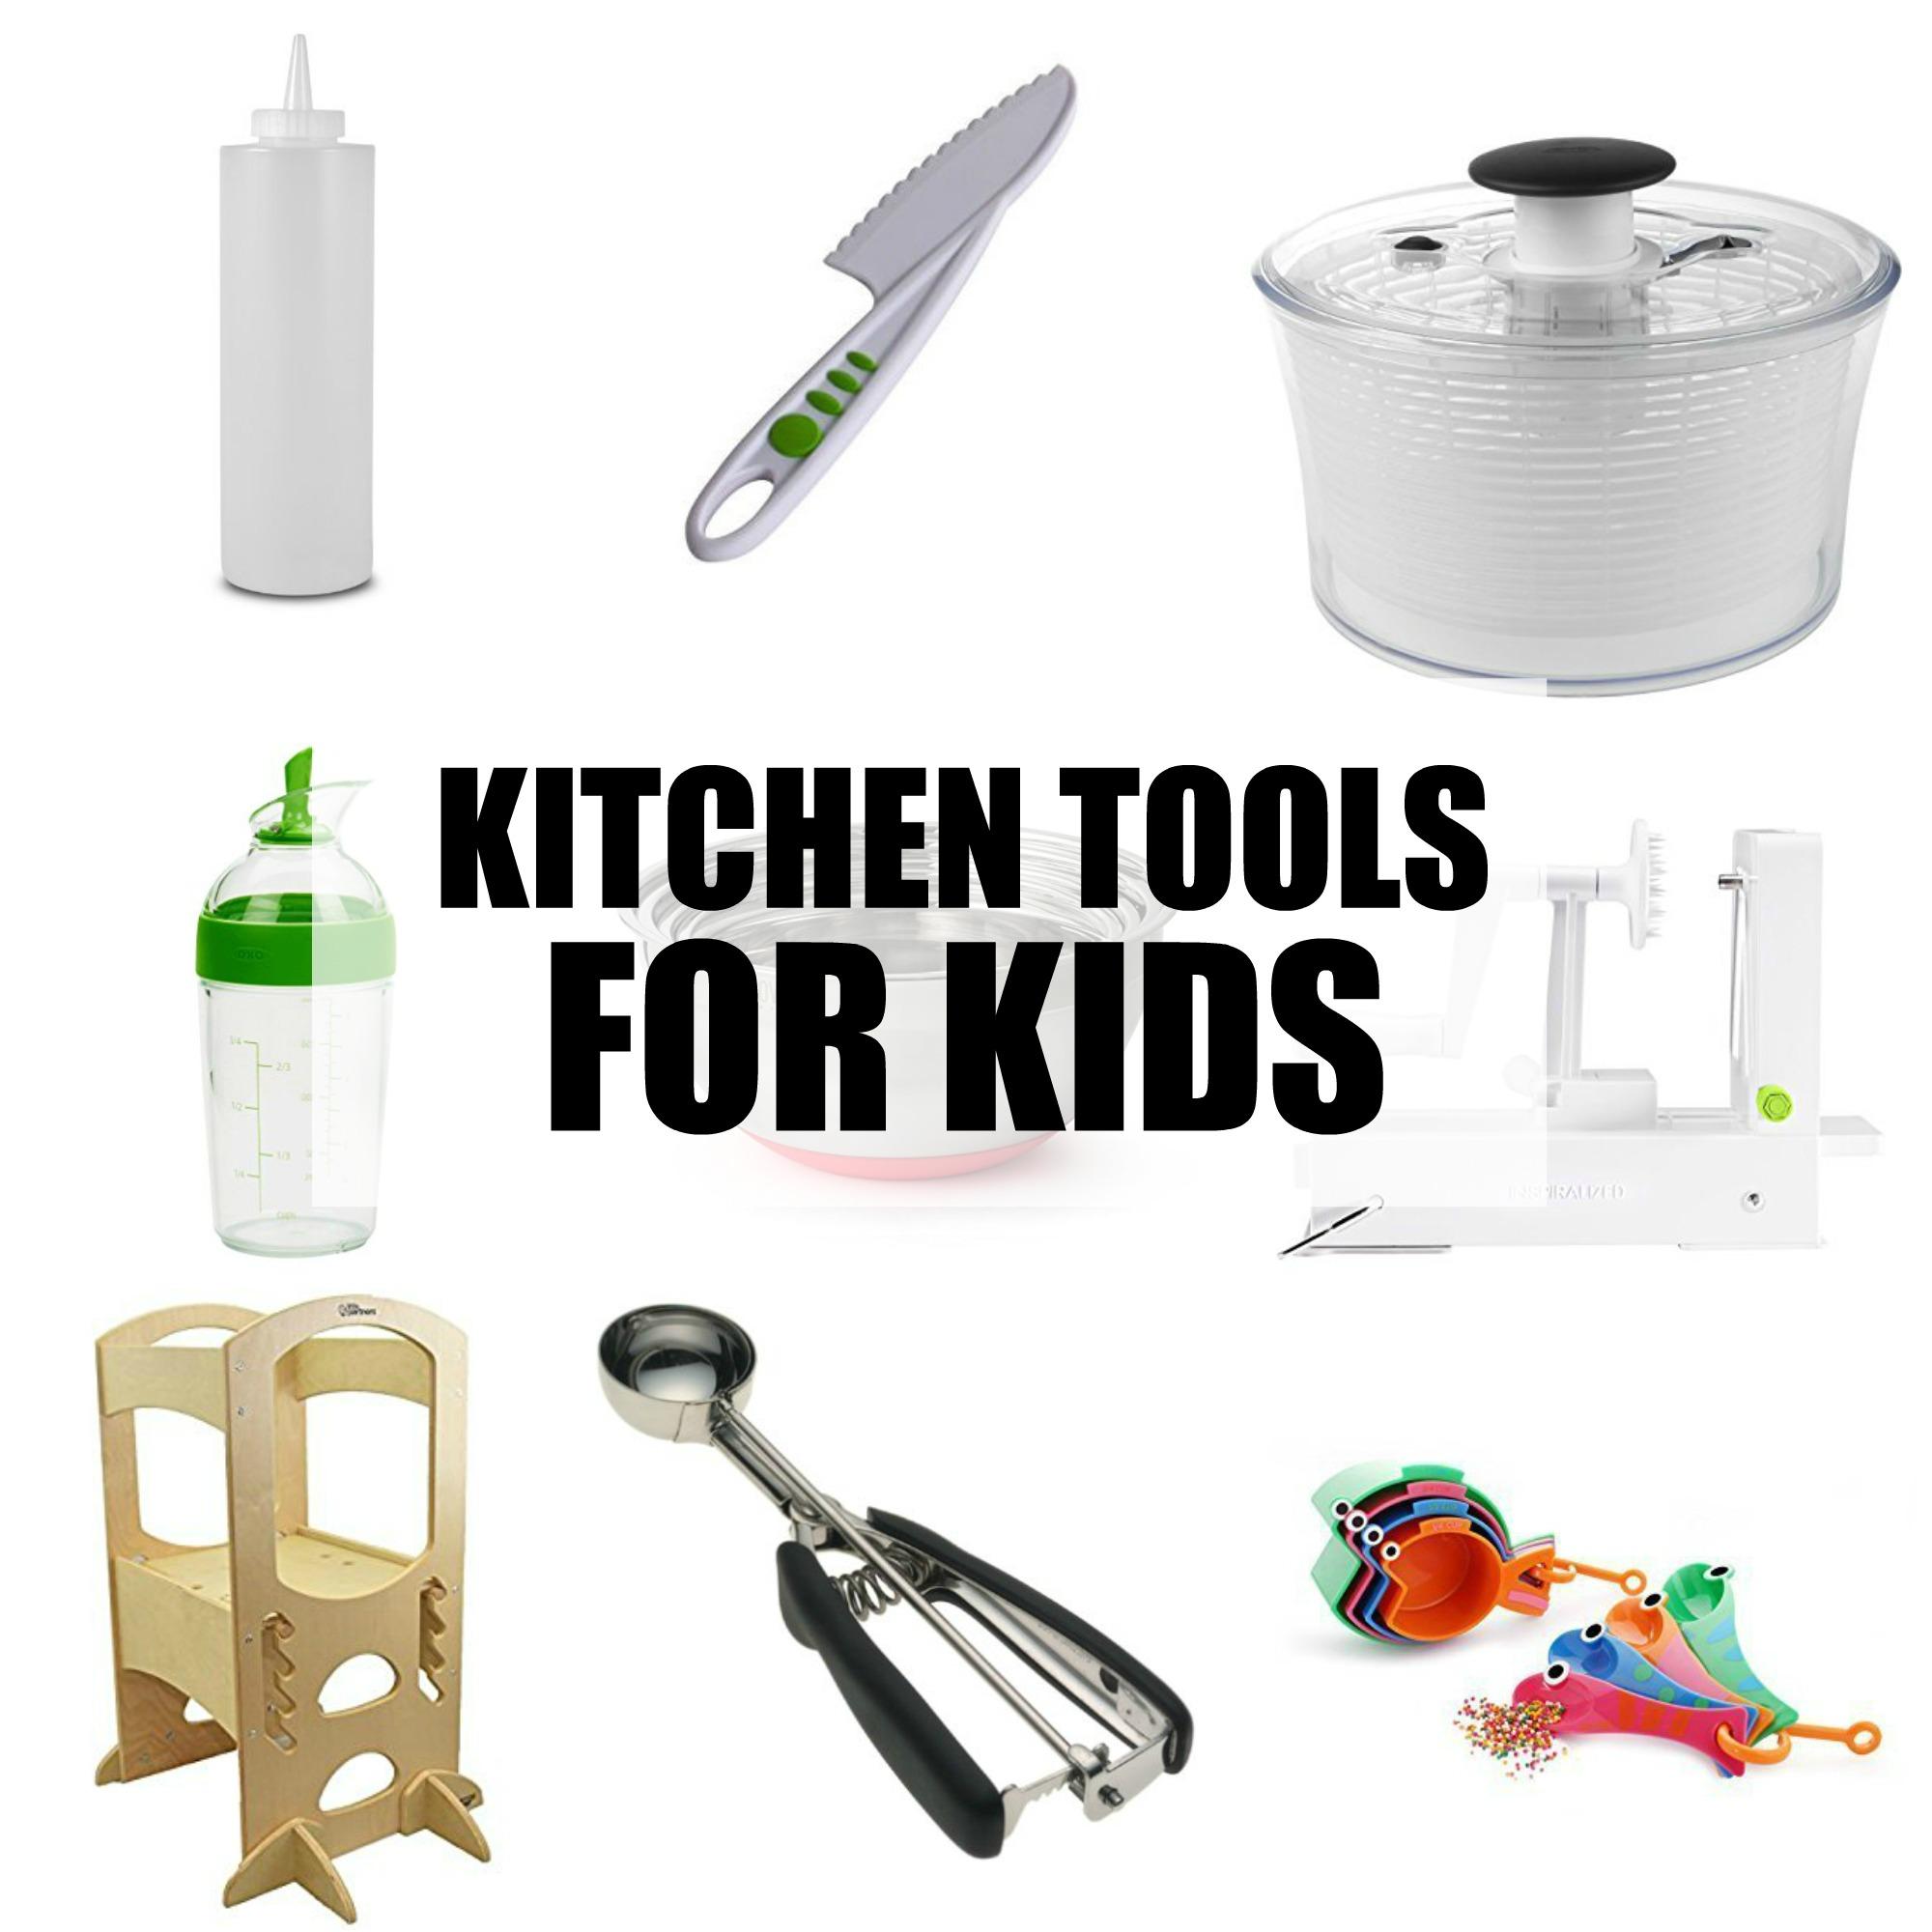 https://www.theleangreenbean.com/wp-content/uploads/2017/11/kitchen-tools-square.jpg